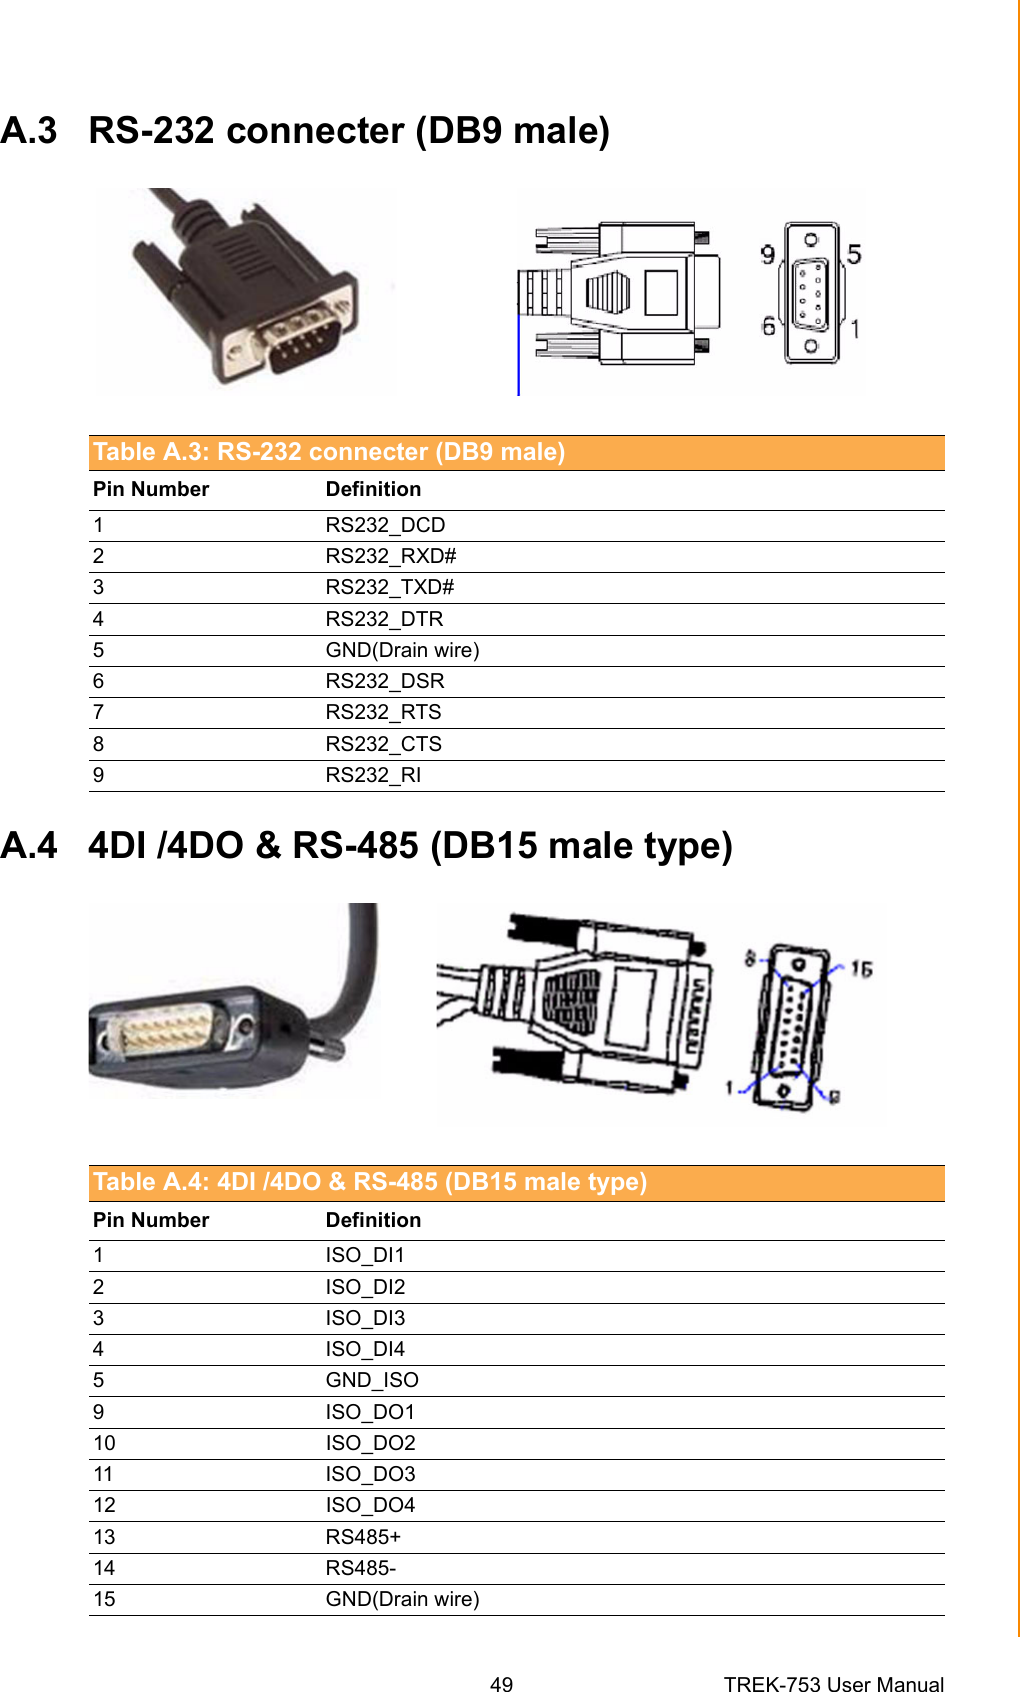 49 TREK-753 User ManualAppendix A High Density Cable Pin AssignmentA.3 RS-232 connecter (DB9 male)A.4 4DI /4DO &amp; RS-485 (DB15 male type)Table A.3: RS-232 connecter (DB9 male)Pin Number  Definition1 RS232_DCD2 RS232_RXD#3 RS232_TXD#4 RS232_DTR5 GND(Drain wire)6 RS232_DSR7 RS232_RTS8 RS232_CTS9 RS232_RITable A.4: 4DI /4DO &amp; RS-485 (DB15 male type)Pin Number  Definition1ISO_DI12ISO_DI23ISO_DI34ISO_DI45GND_ISO 9ISO_DO110 ISO_DO211 ISO_DO312 ISO_DO413 RS485+14 RS485-15 GND(Drain wire)